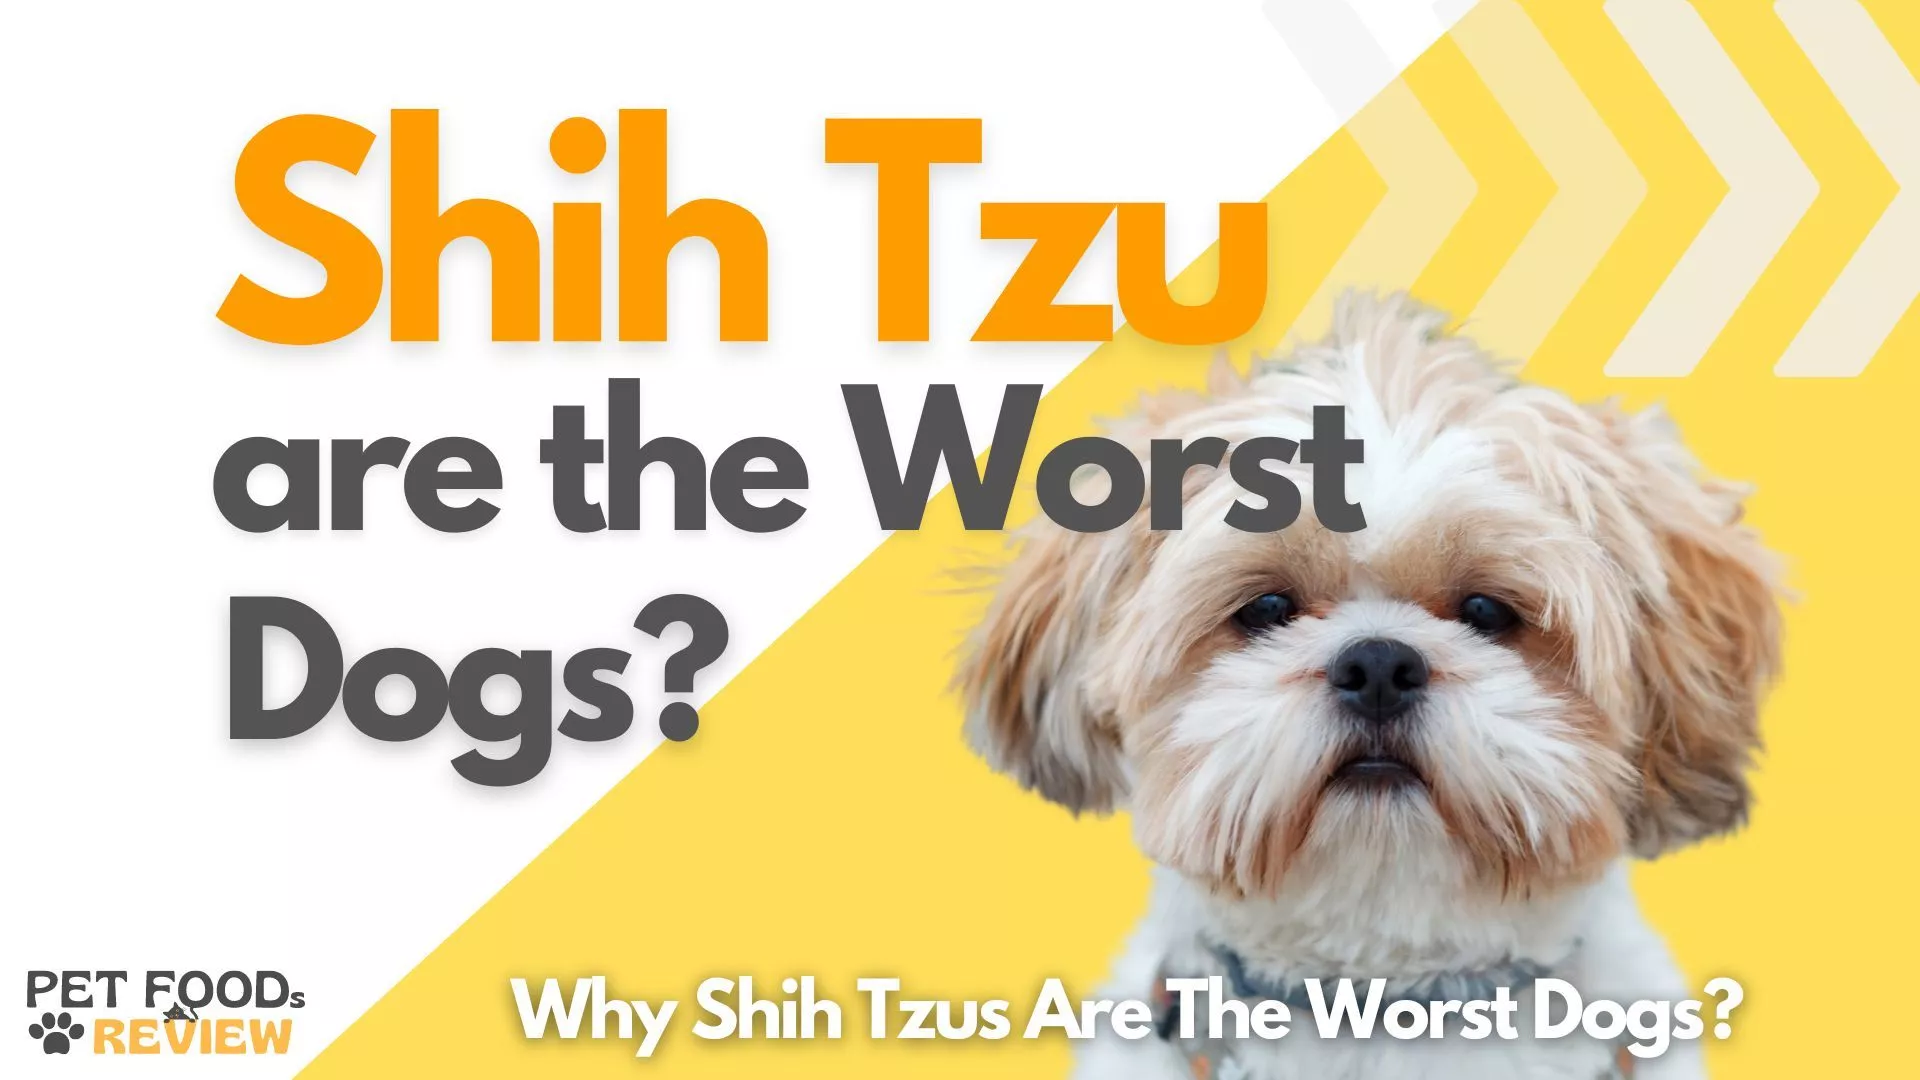 Why Shih Tzu May Not Be the Ideal Dog Breed: 16 Reasons Explained